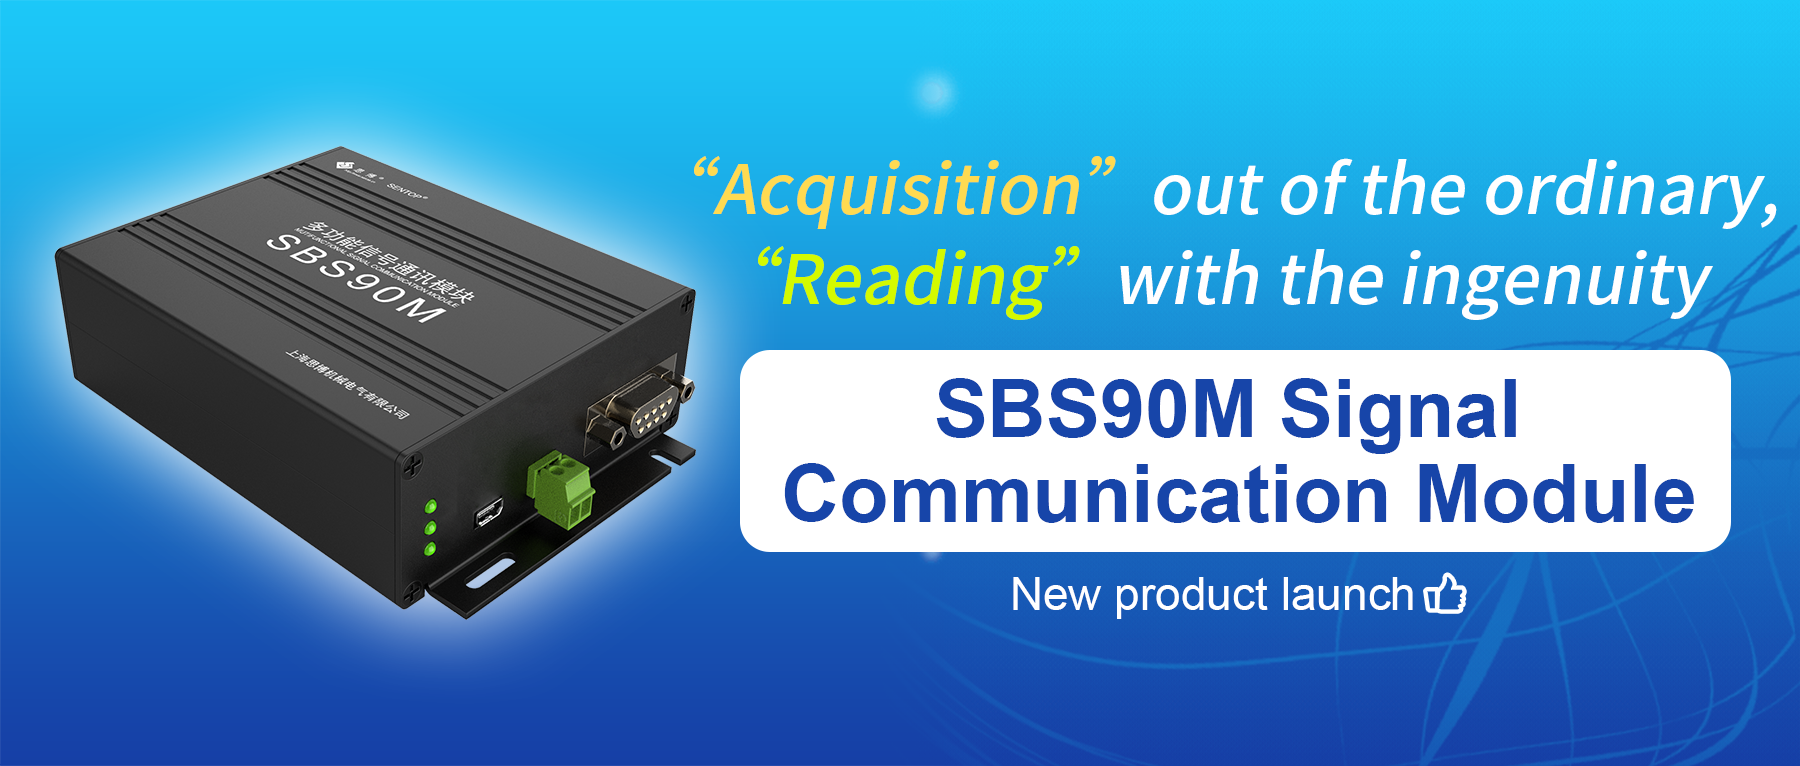 'Acquisition' out of the ordinary, 'Reading' with the ingenuity | SBS90M Signal Communication Module